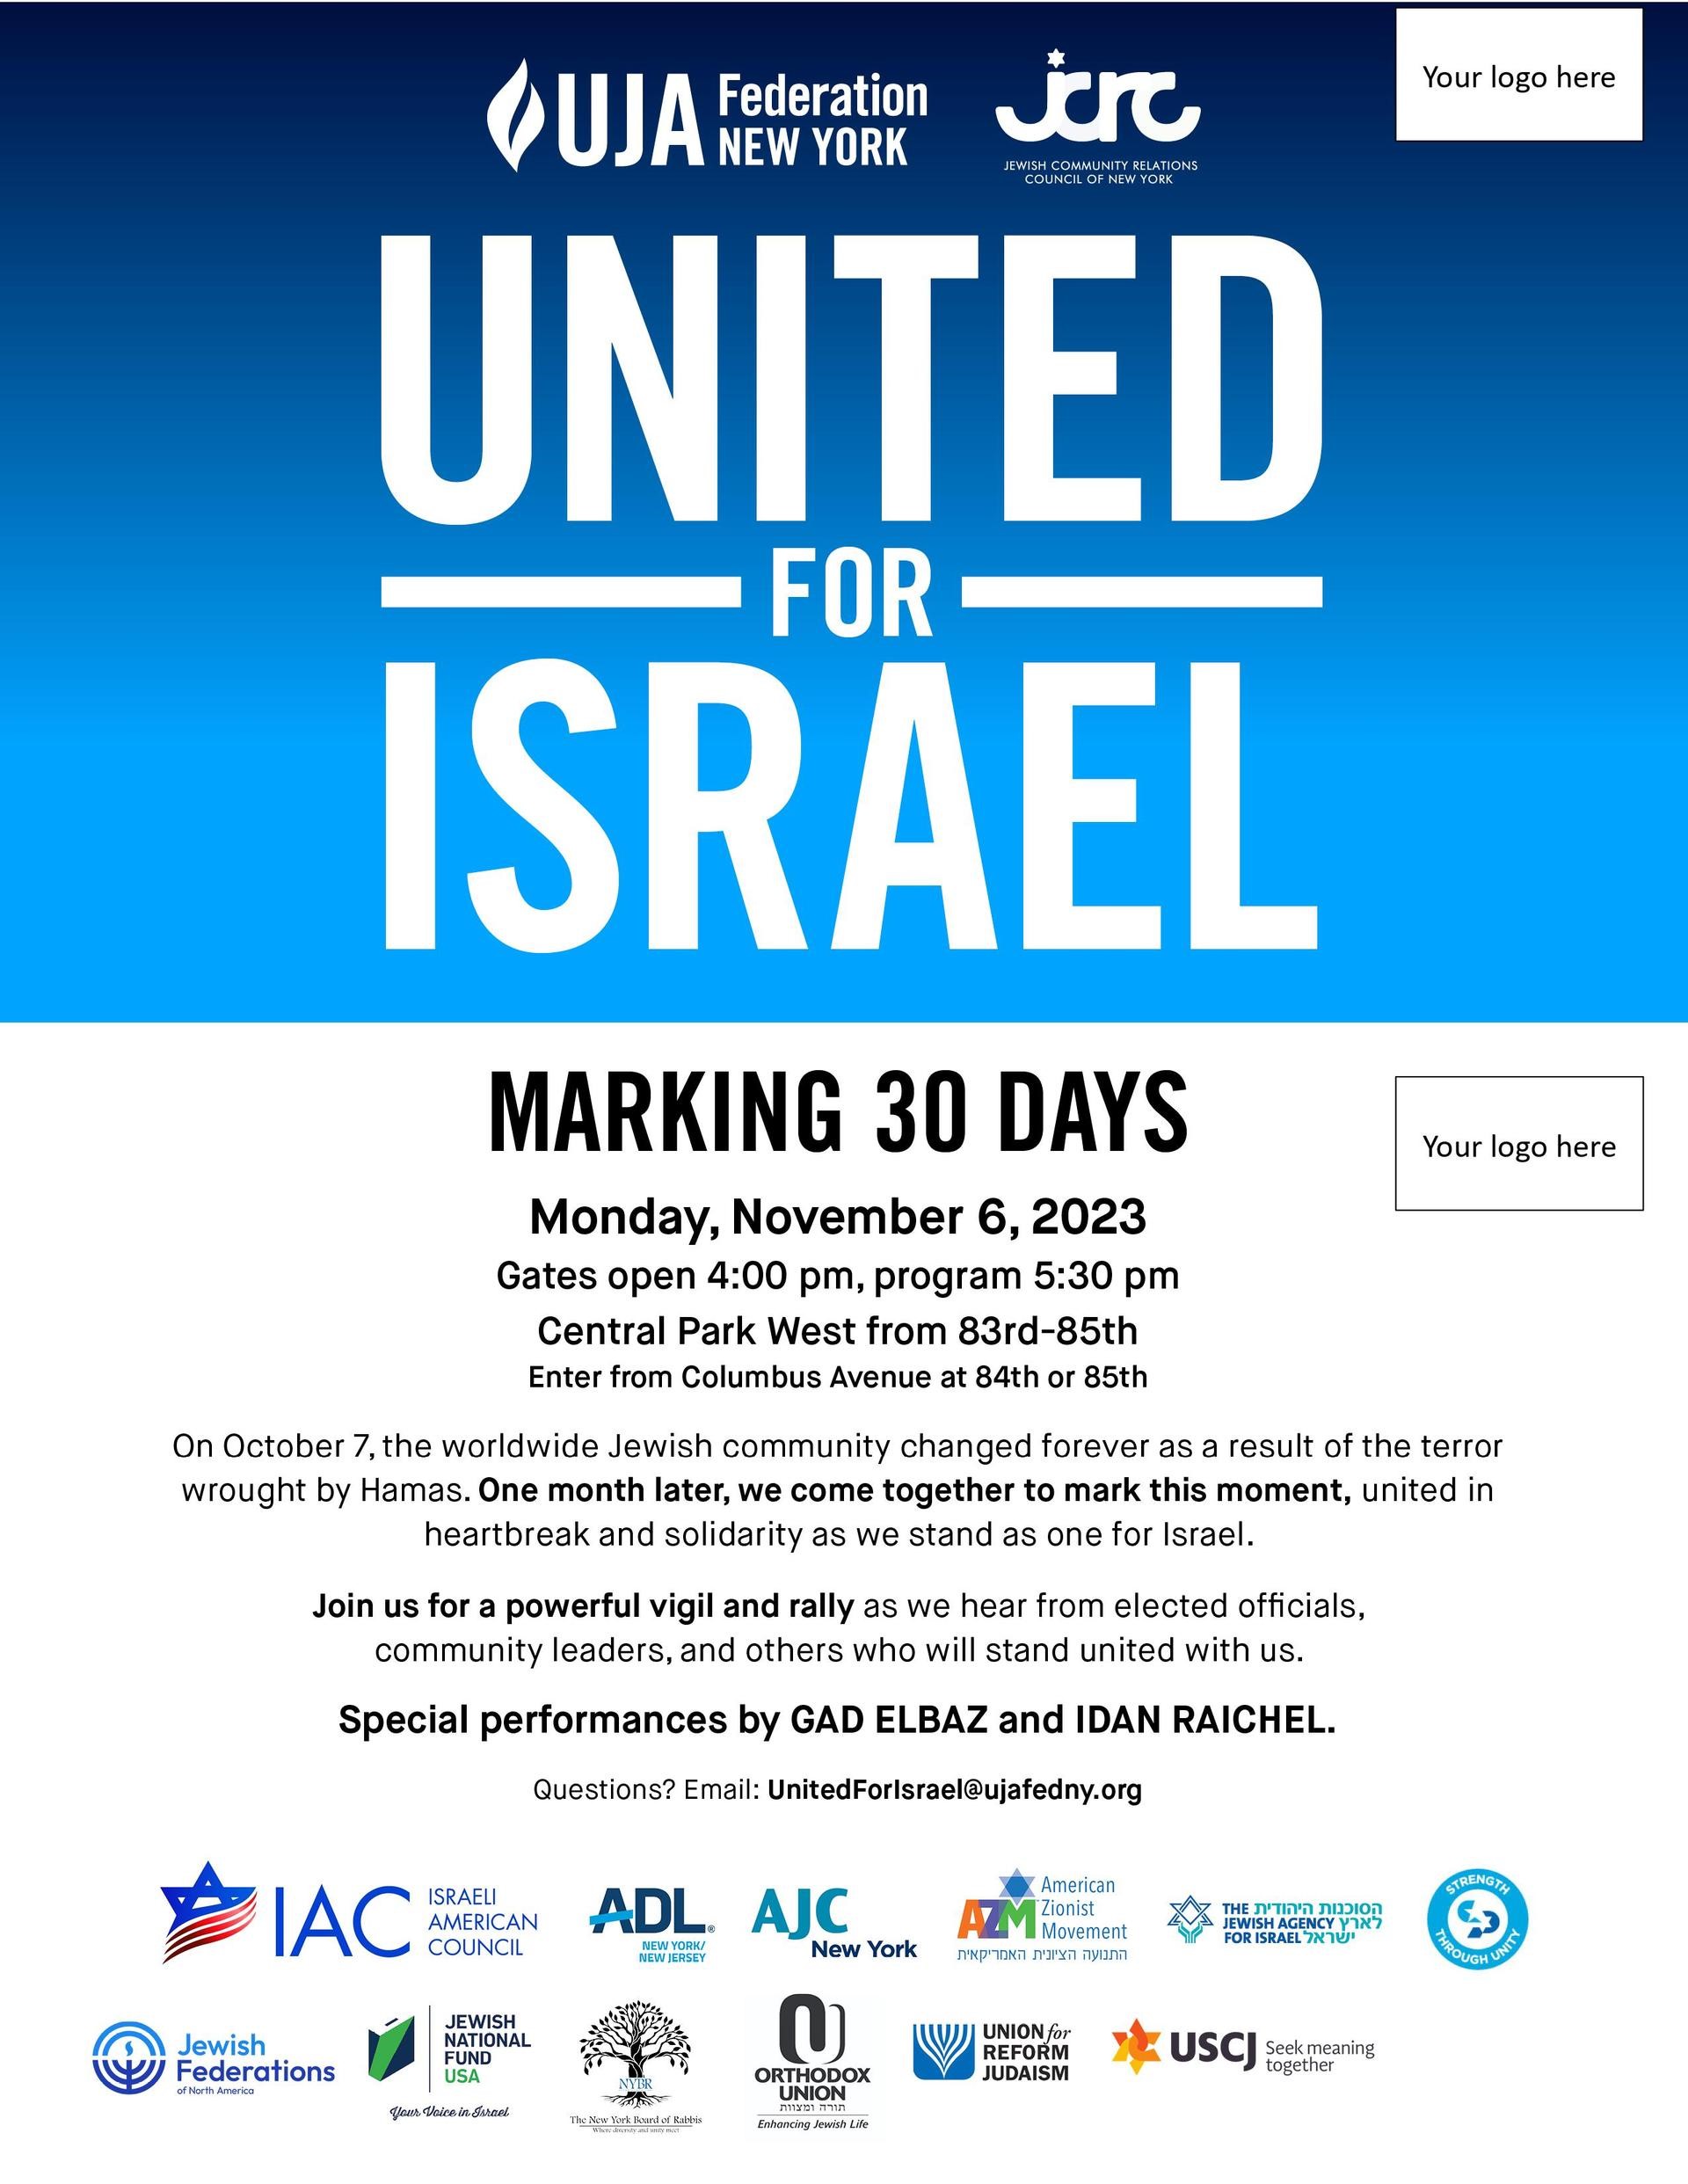 UJA Federation NY and JCRC - United for Israel Marking 30 Days